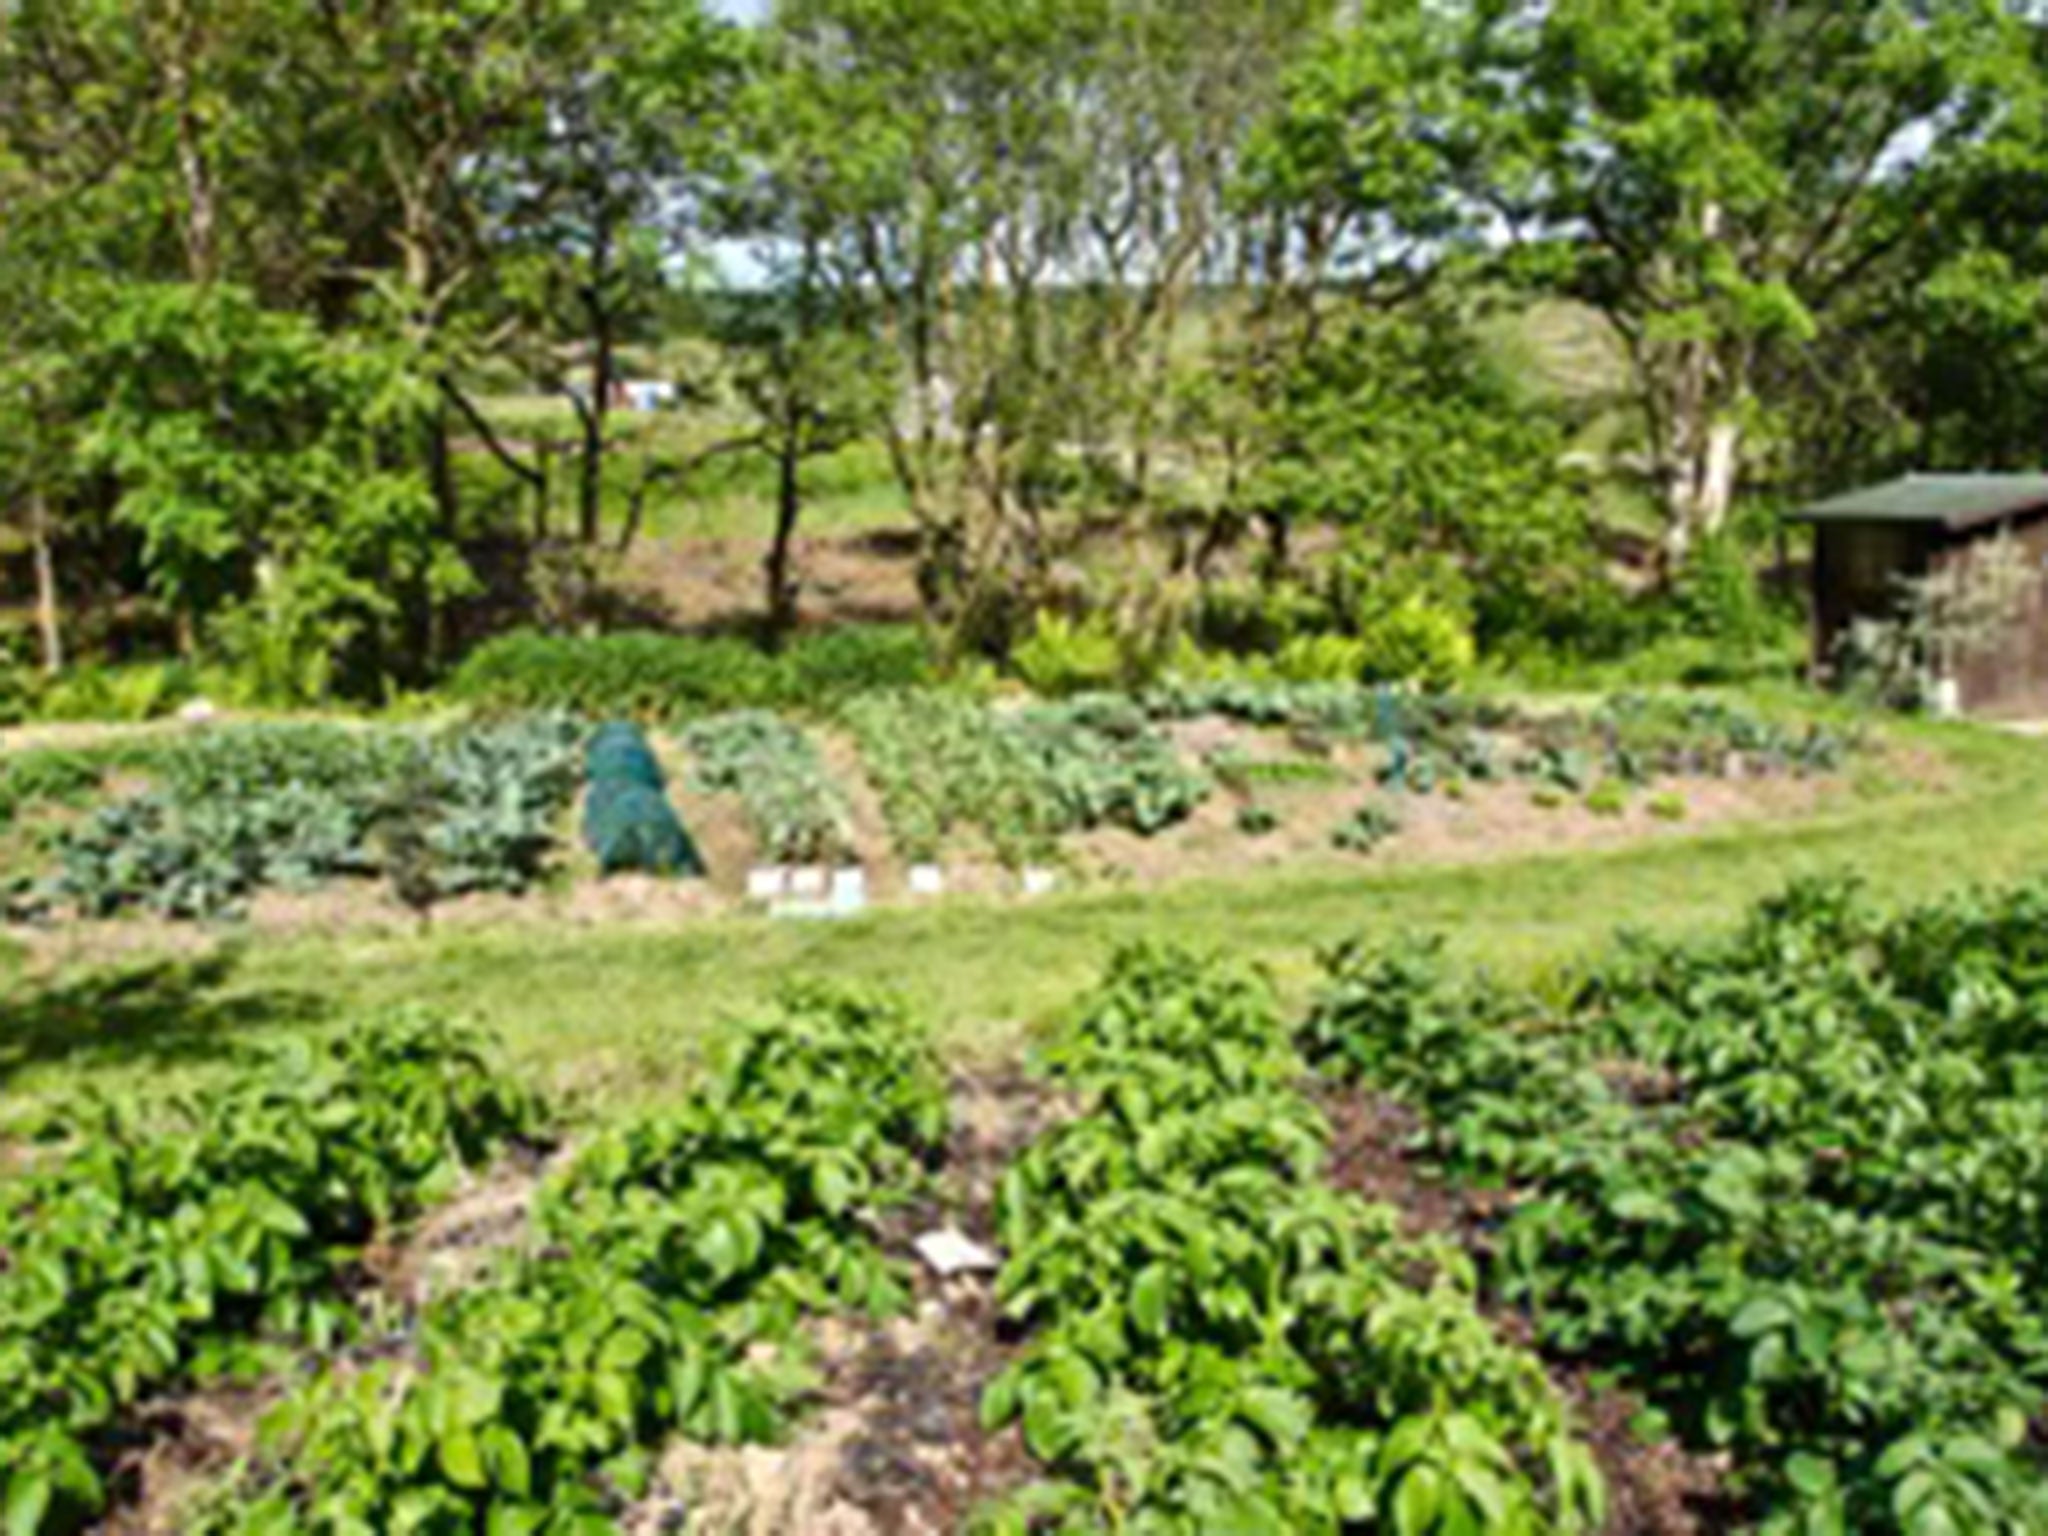 The author’s vegetable garden 30ft above the stream